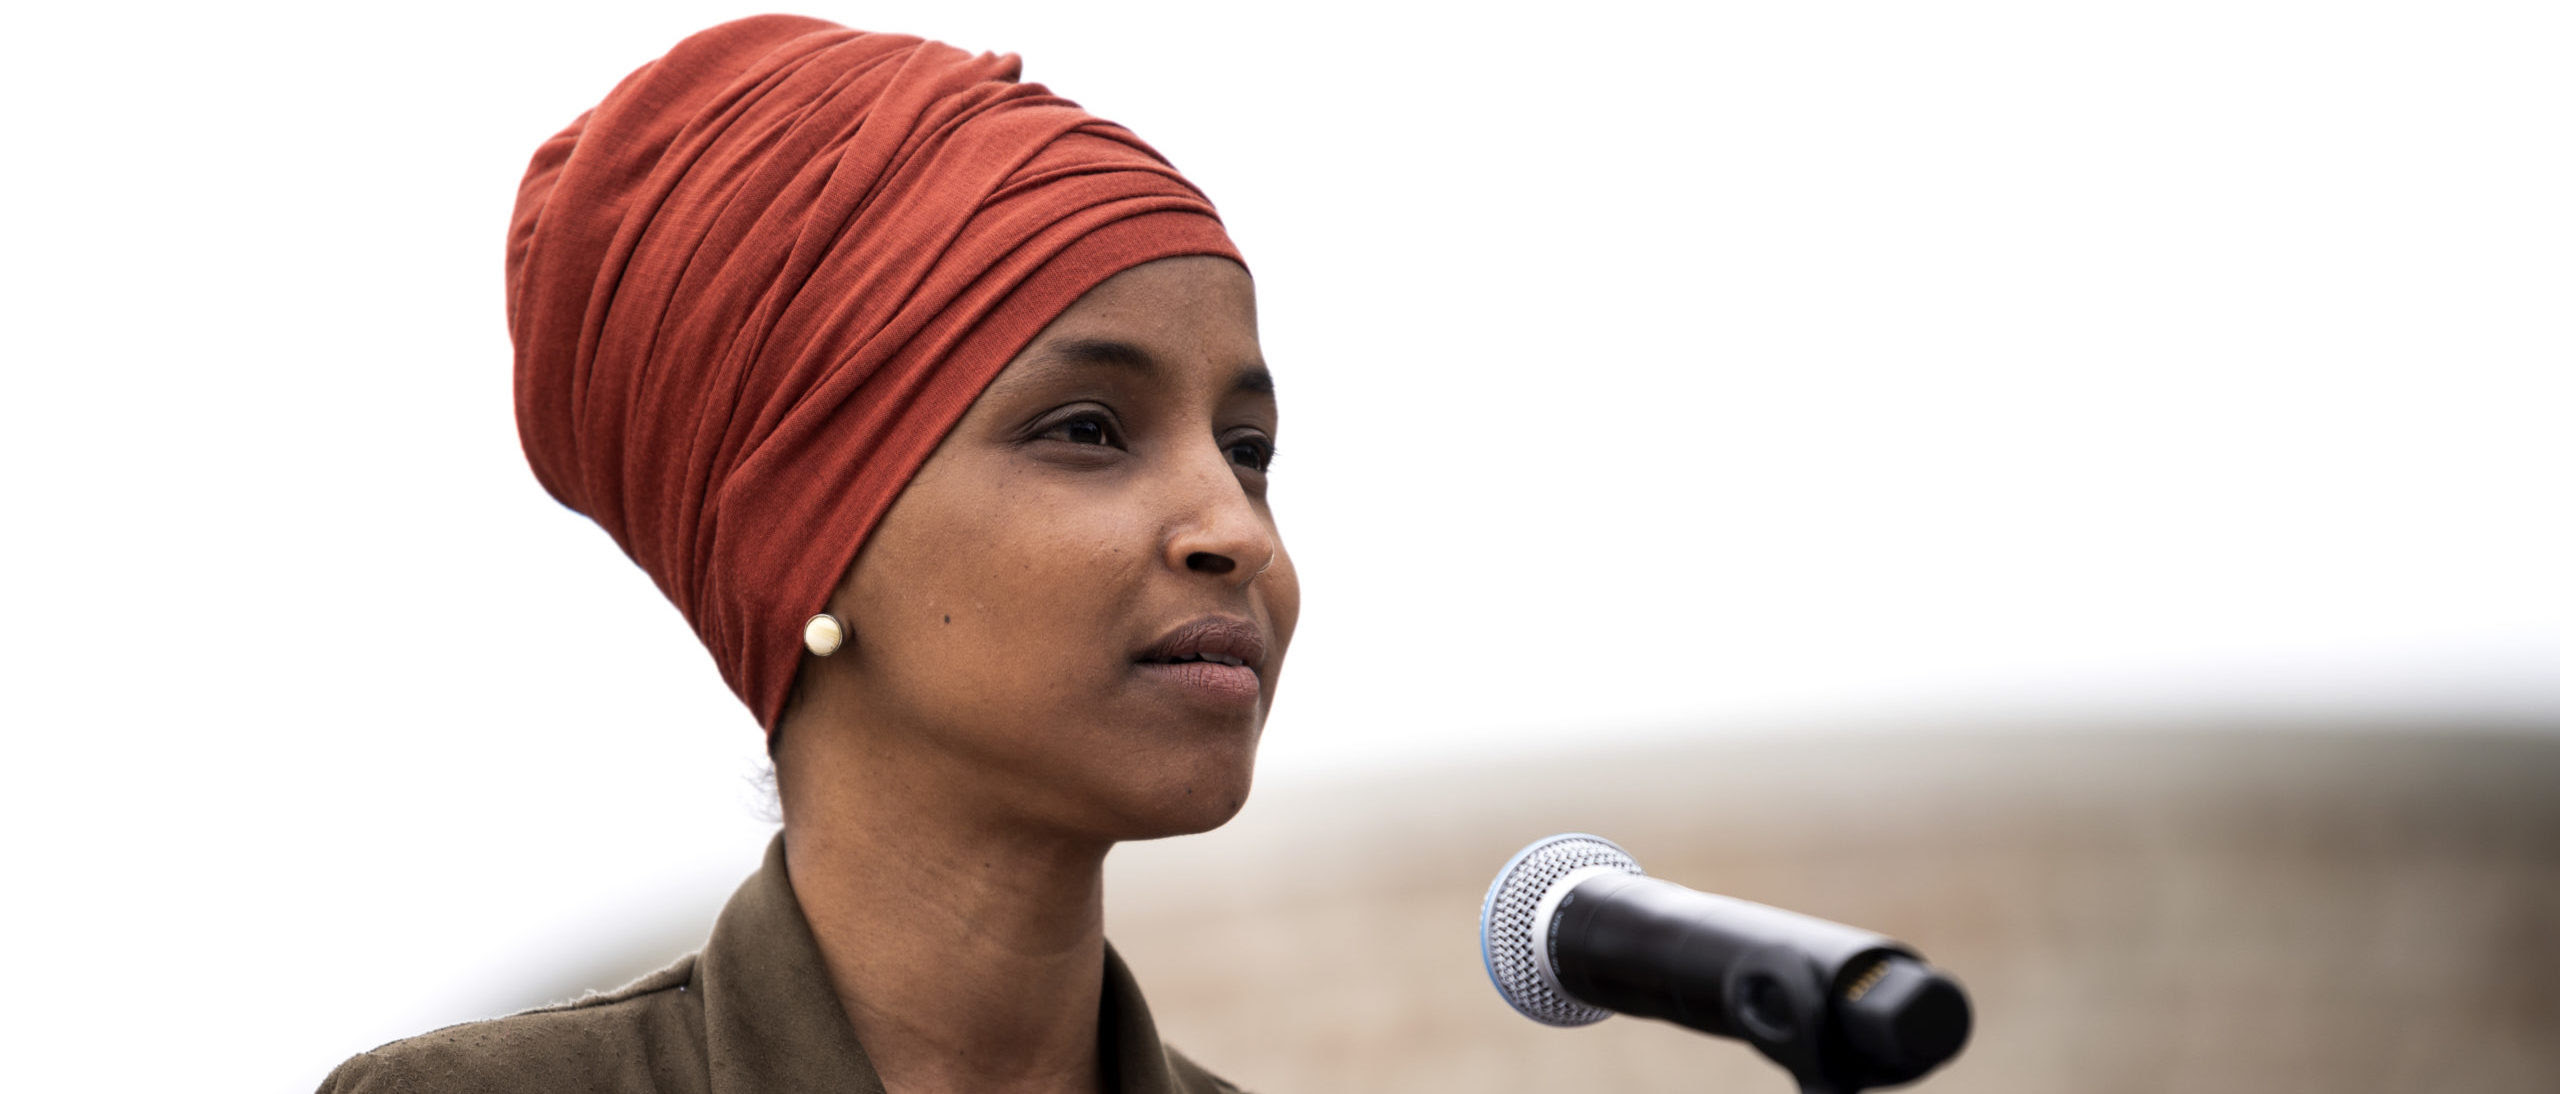 Rep. Ilhan Omar Blames ‘Xenophobia, Racism’ For McCarthy’s Threat To Remove Her From Committee